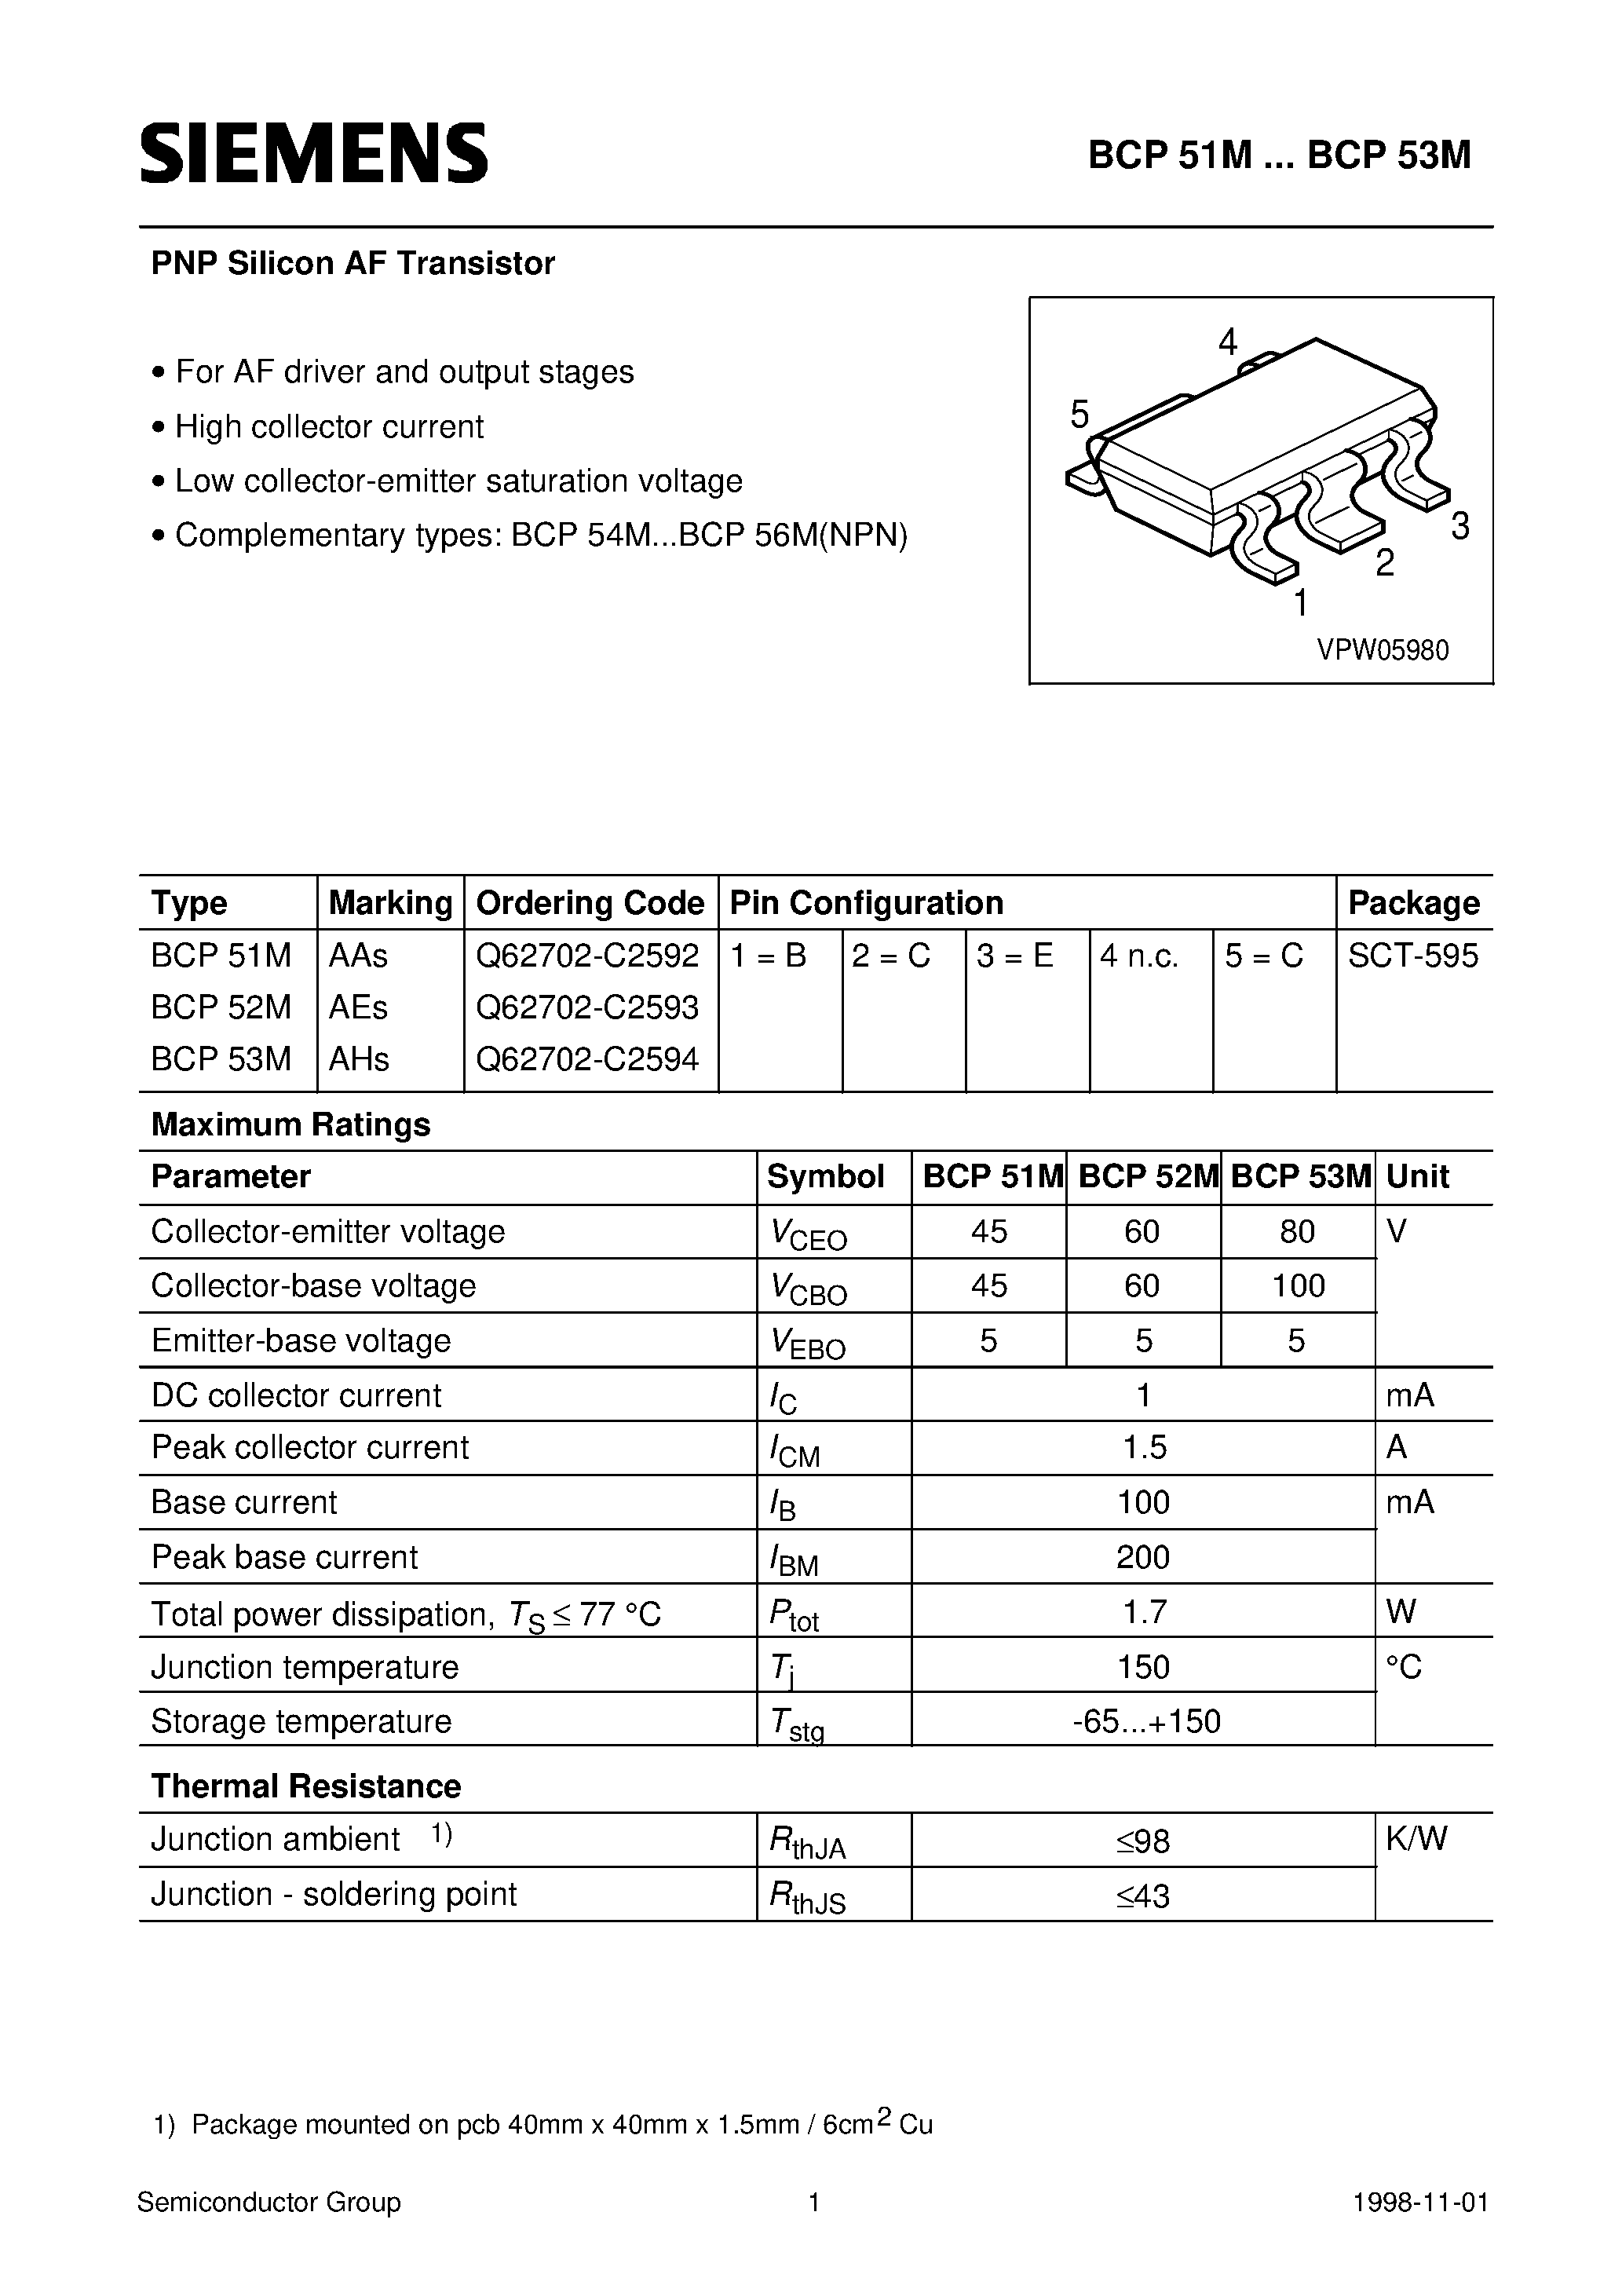 Datasheet BCP52M - PNP Silicon AF Transistor (For AF driver and output stages High collector current) page 1